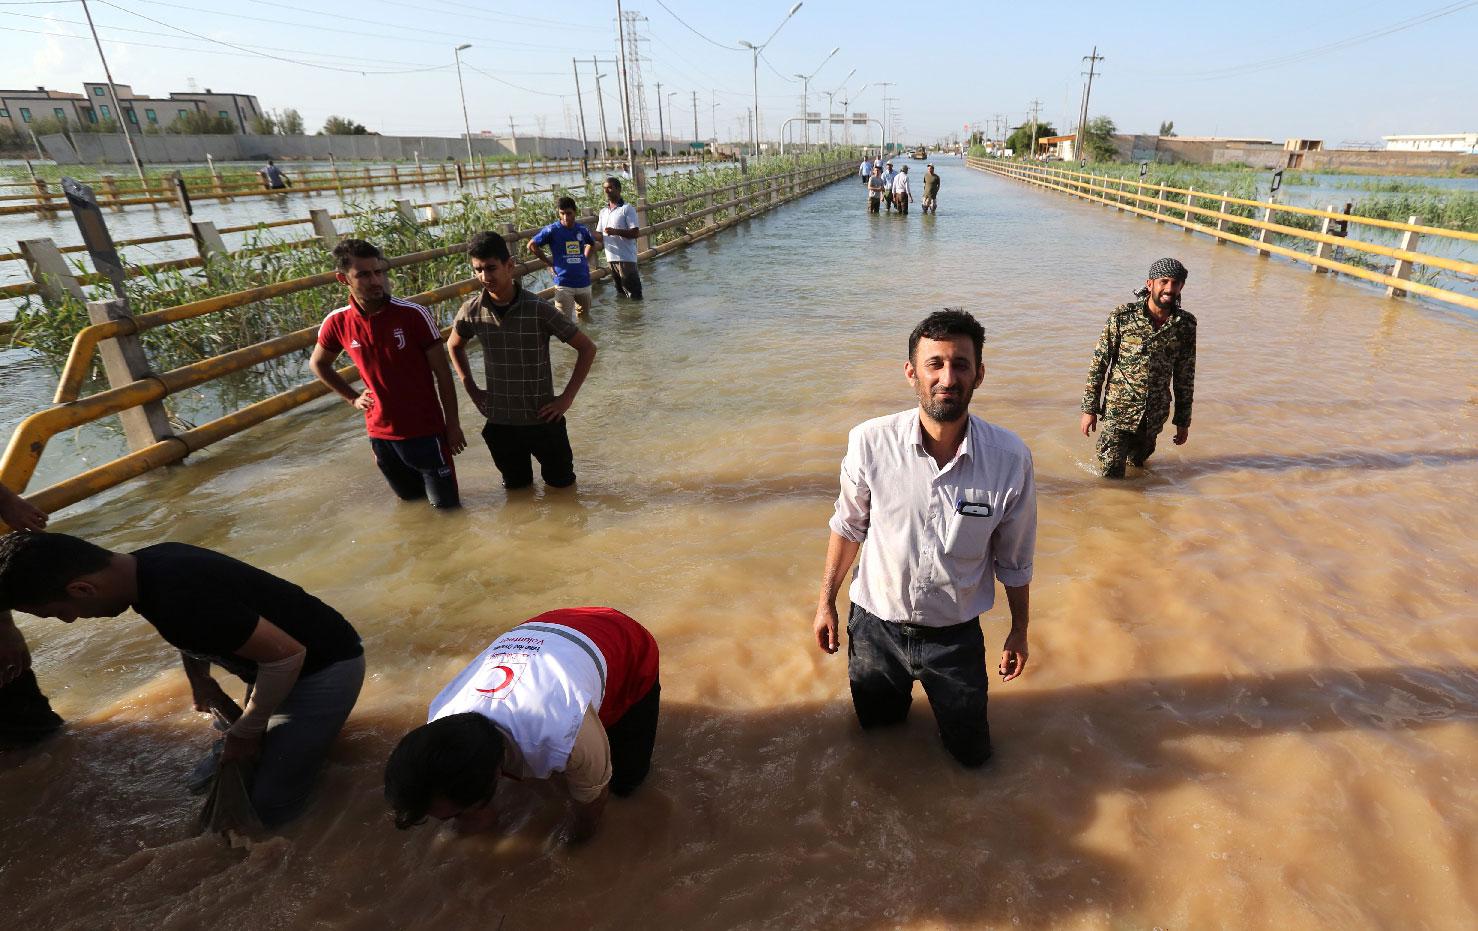 Barricades are set up to contain water in a flooded street in the city of Ahvaz, the capital of Iran's Khuzestan province